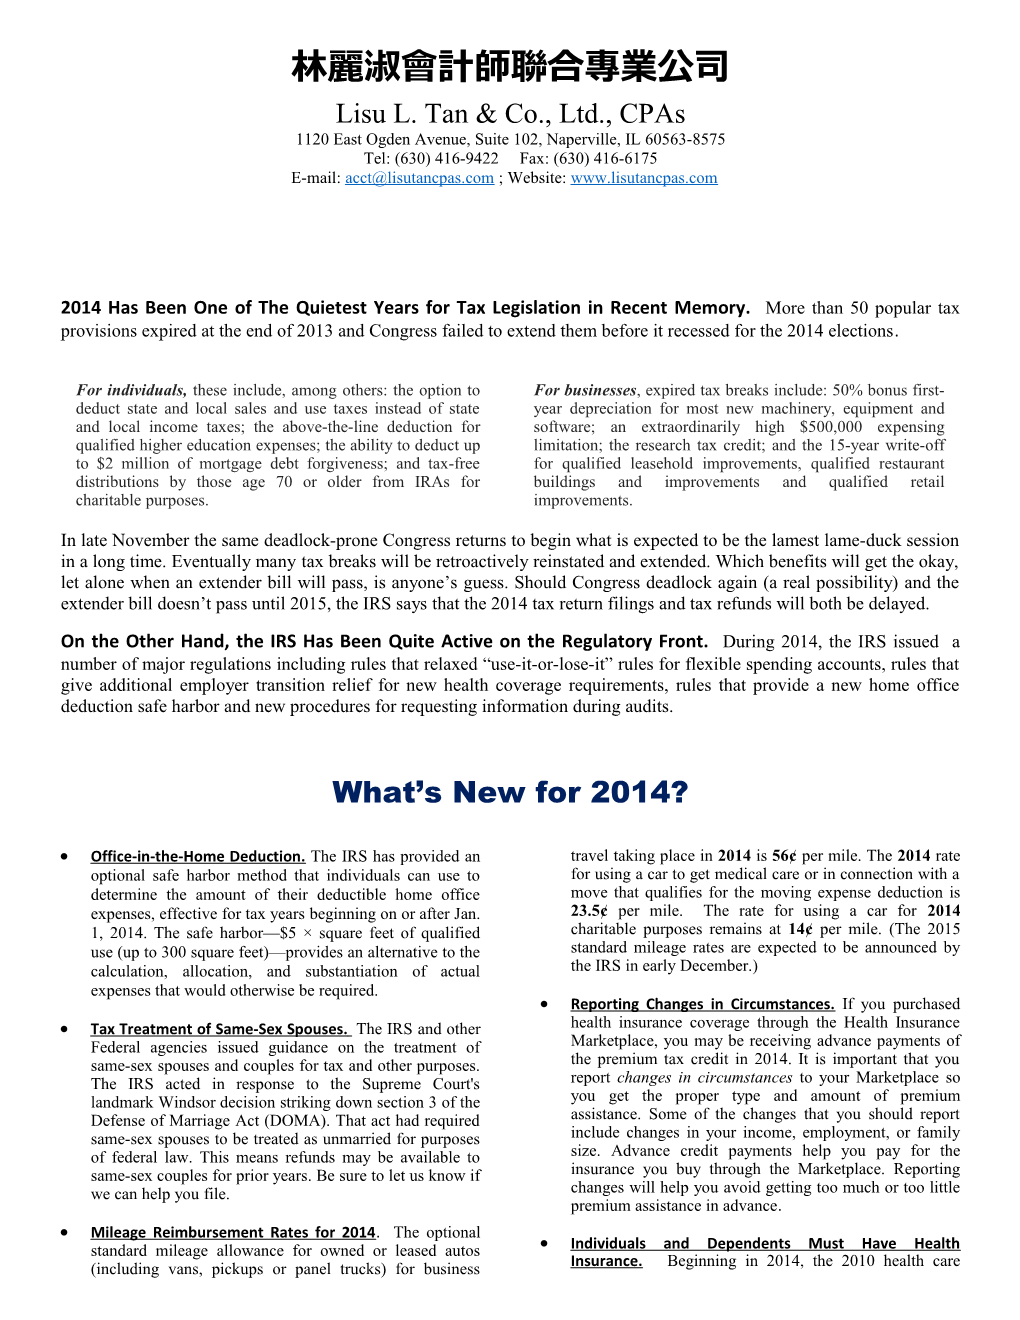 2014 Has Been One of the Quietest Years for Tax Legislation in Recent Memory. More Than